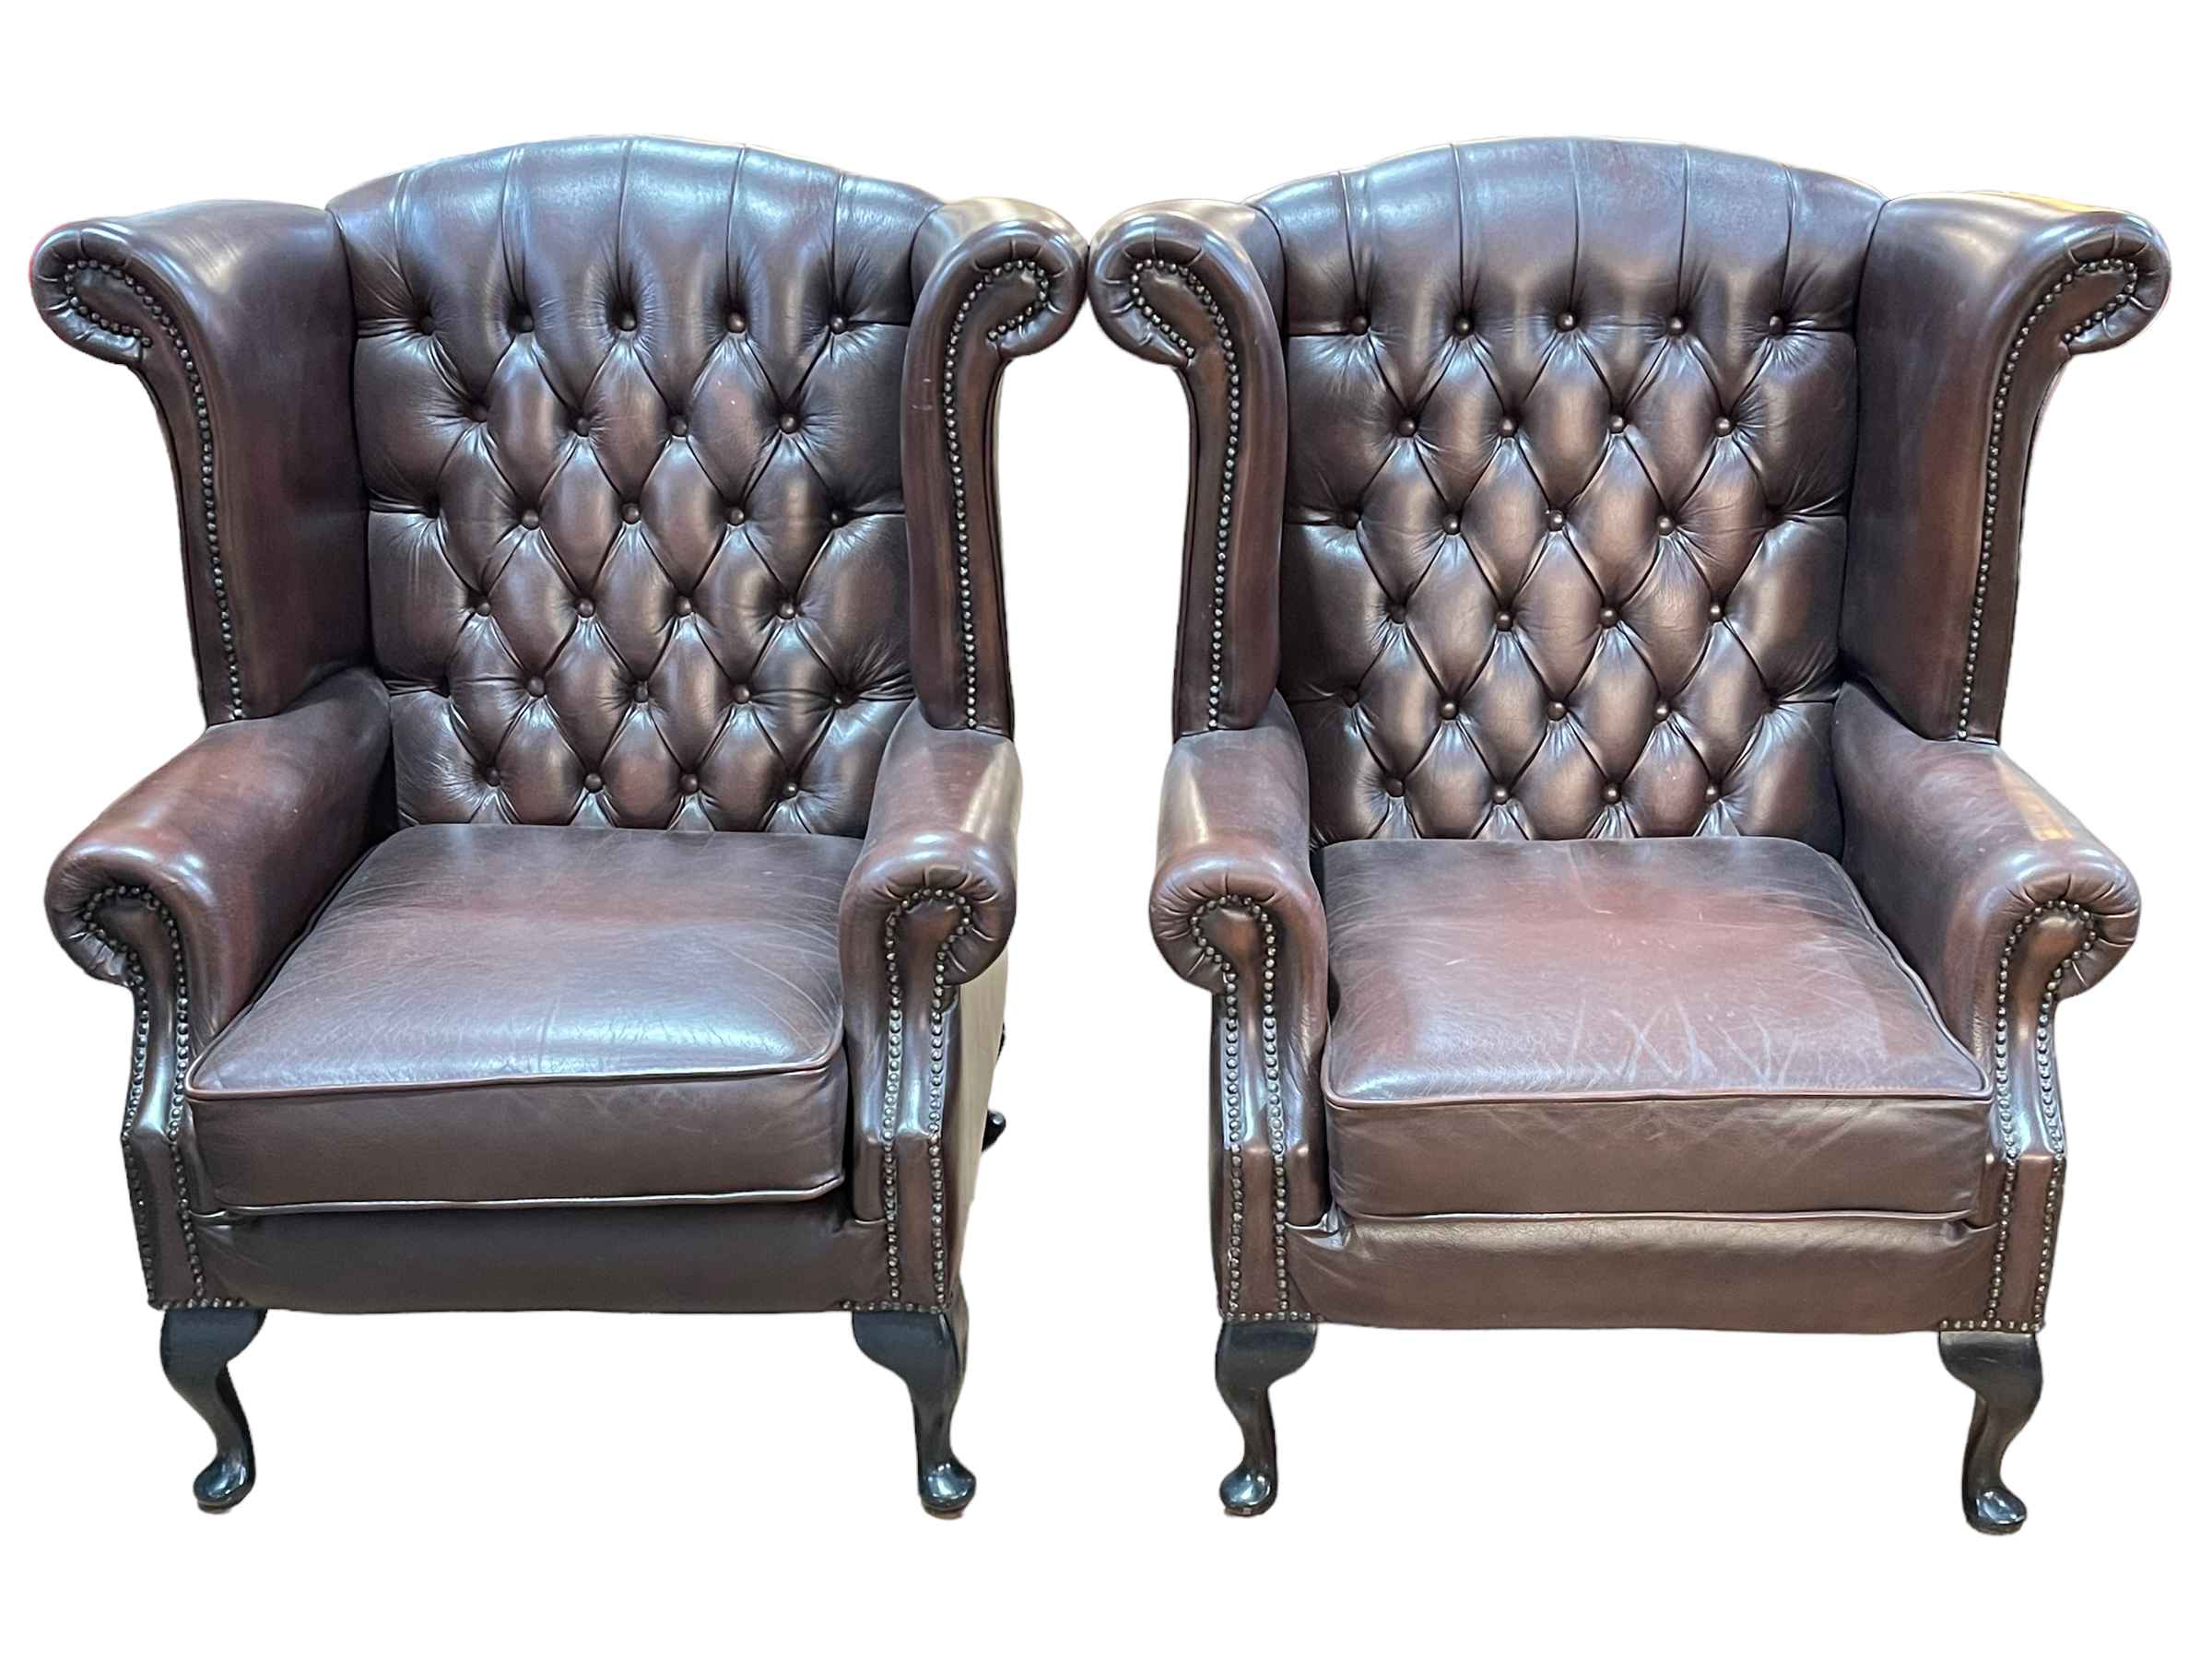 Pair Thomas Lloyd brown deep buttoned leather and studded wing armchairs.